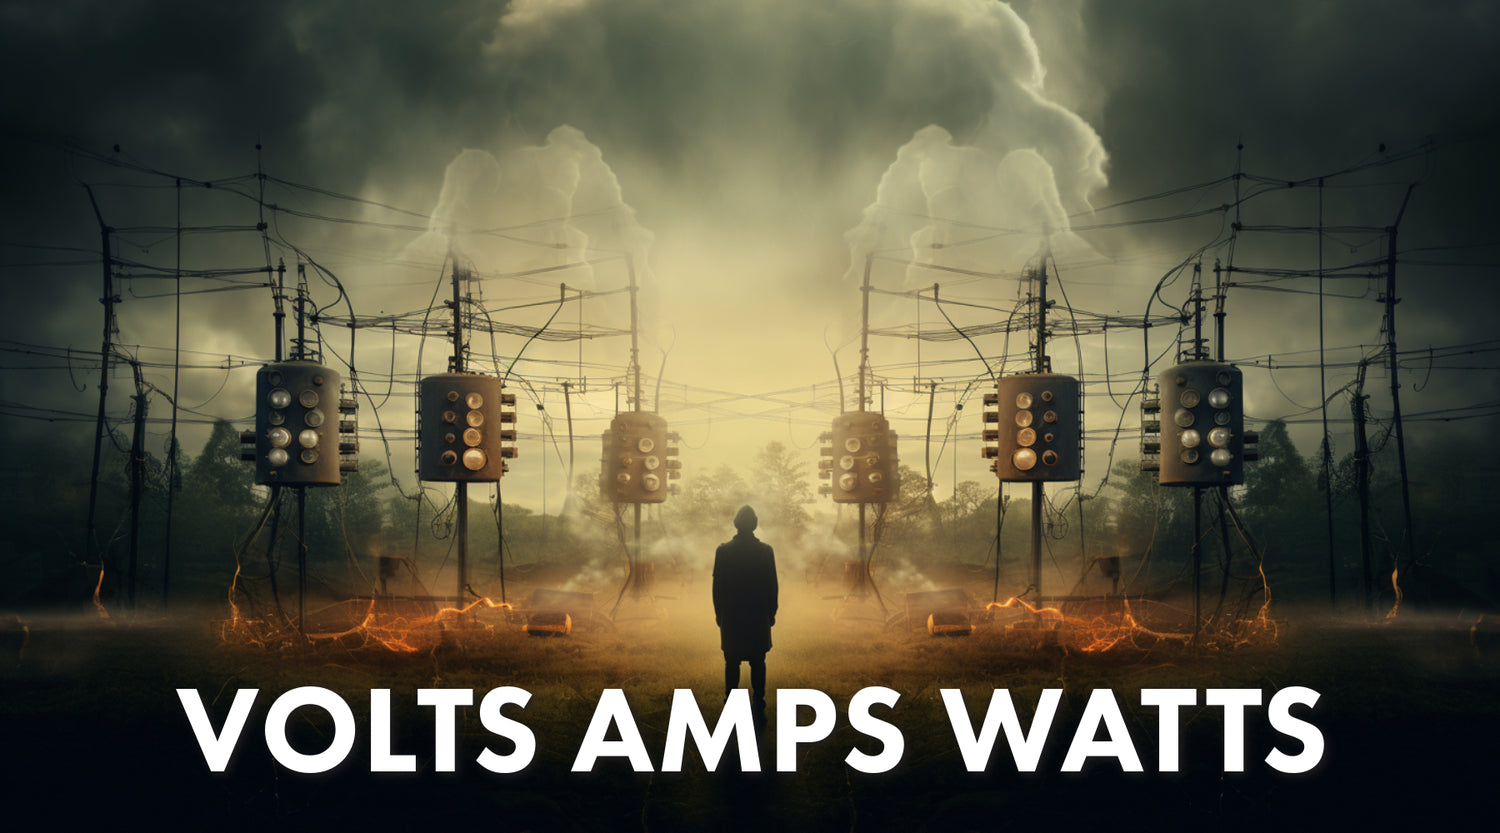 Demystifying the Power Trio: Amps, Watts, and Volts